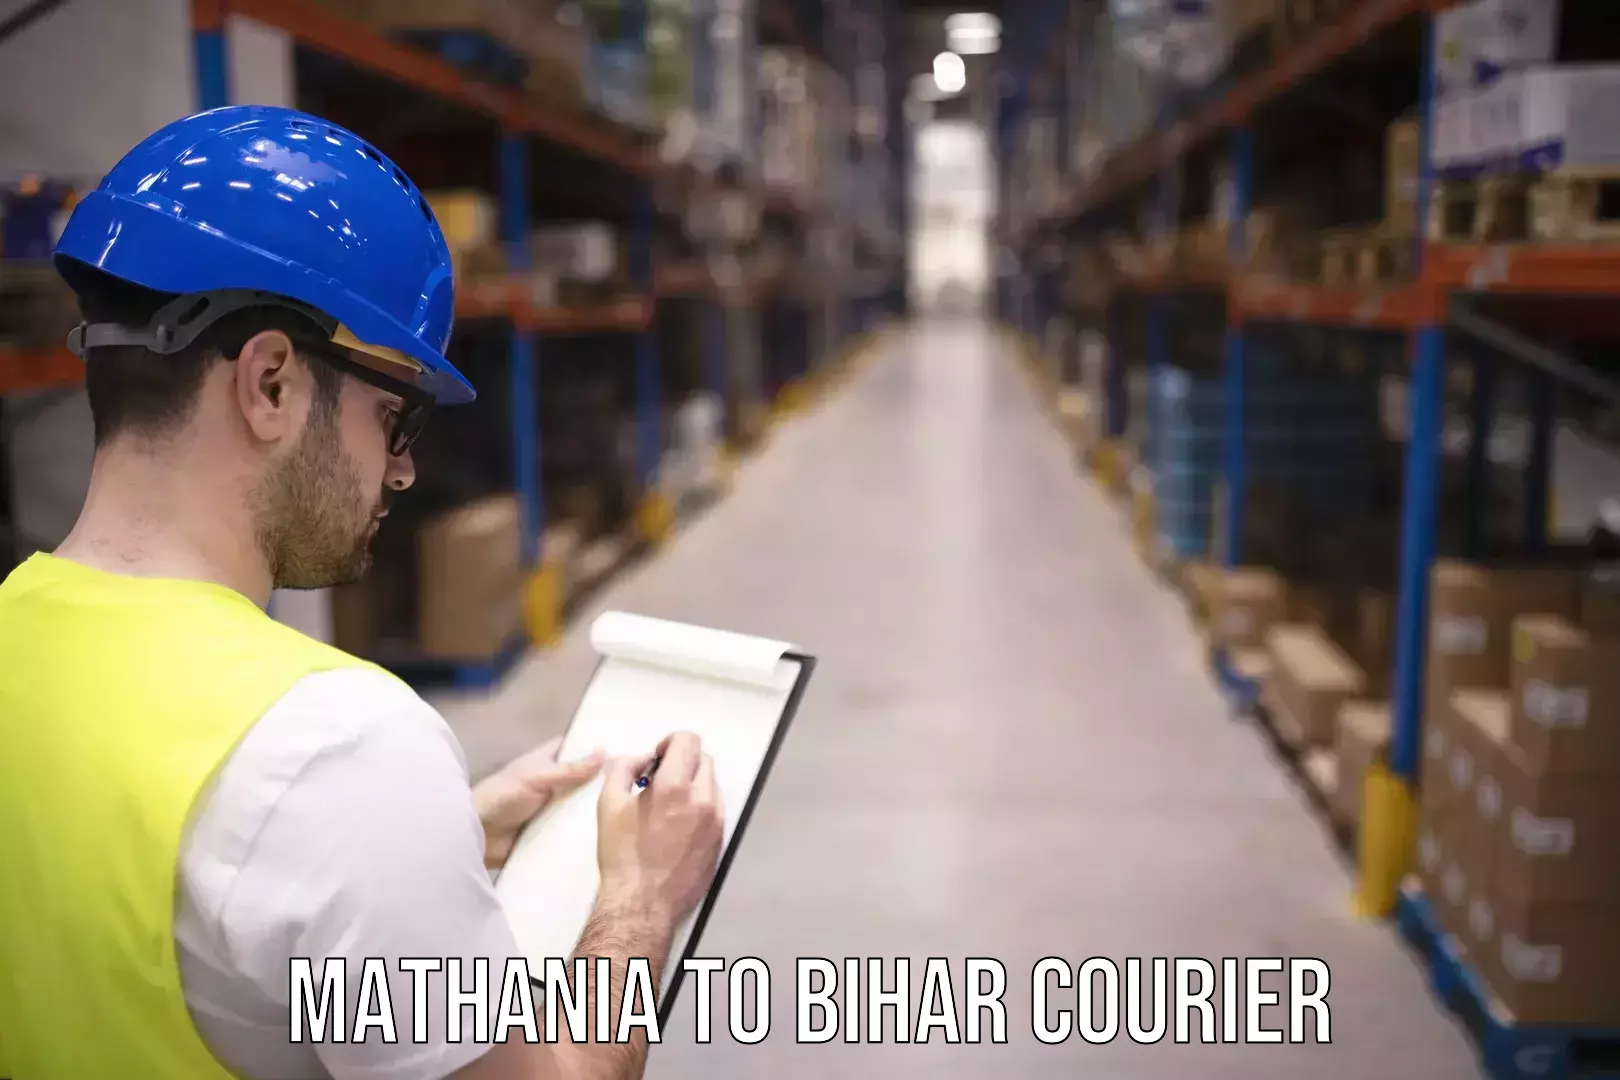 User-friendly courier app Mathania to Giddha